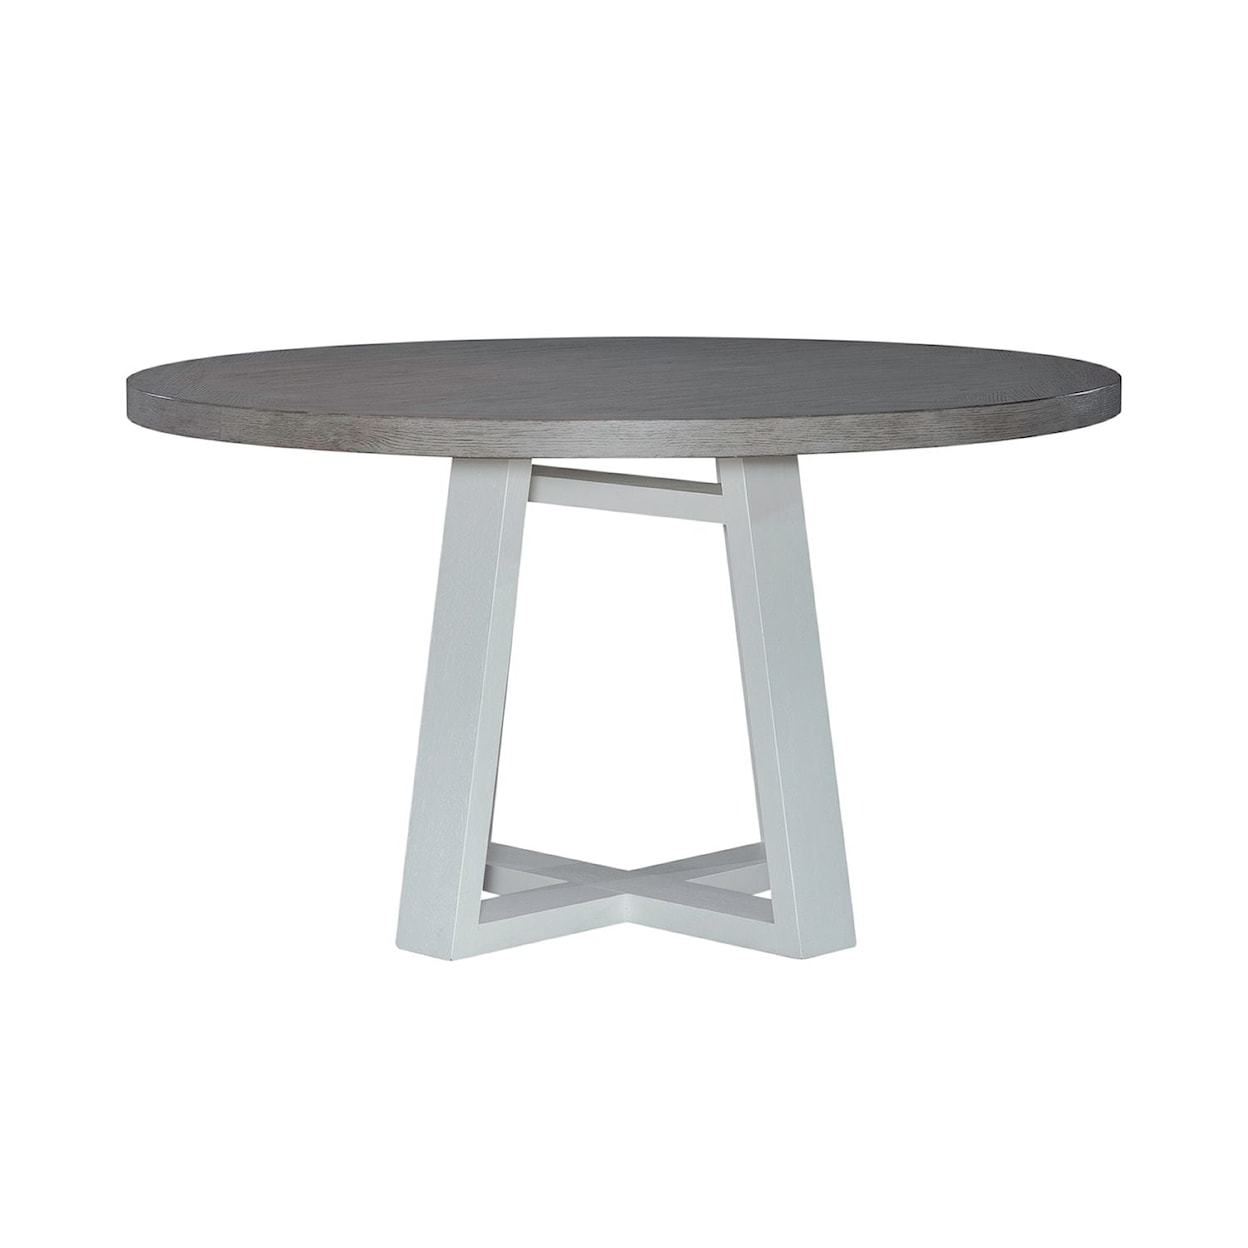 Liberty Furniture Palmetto Heights Round Pedestal Dining Table